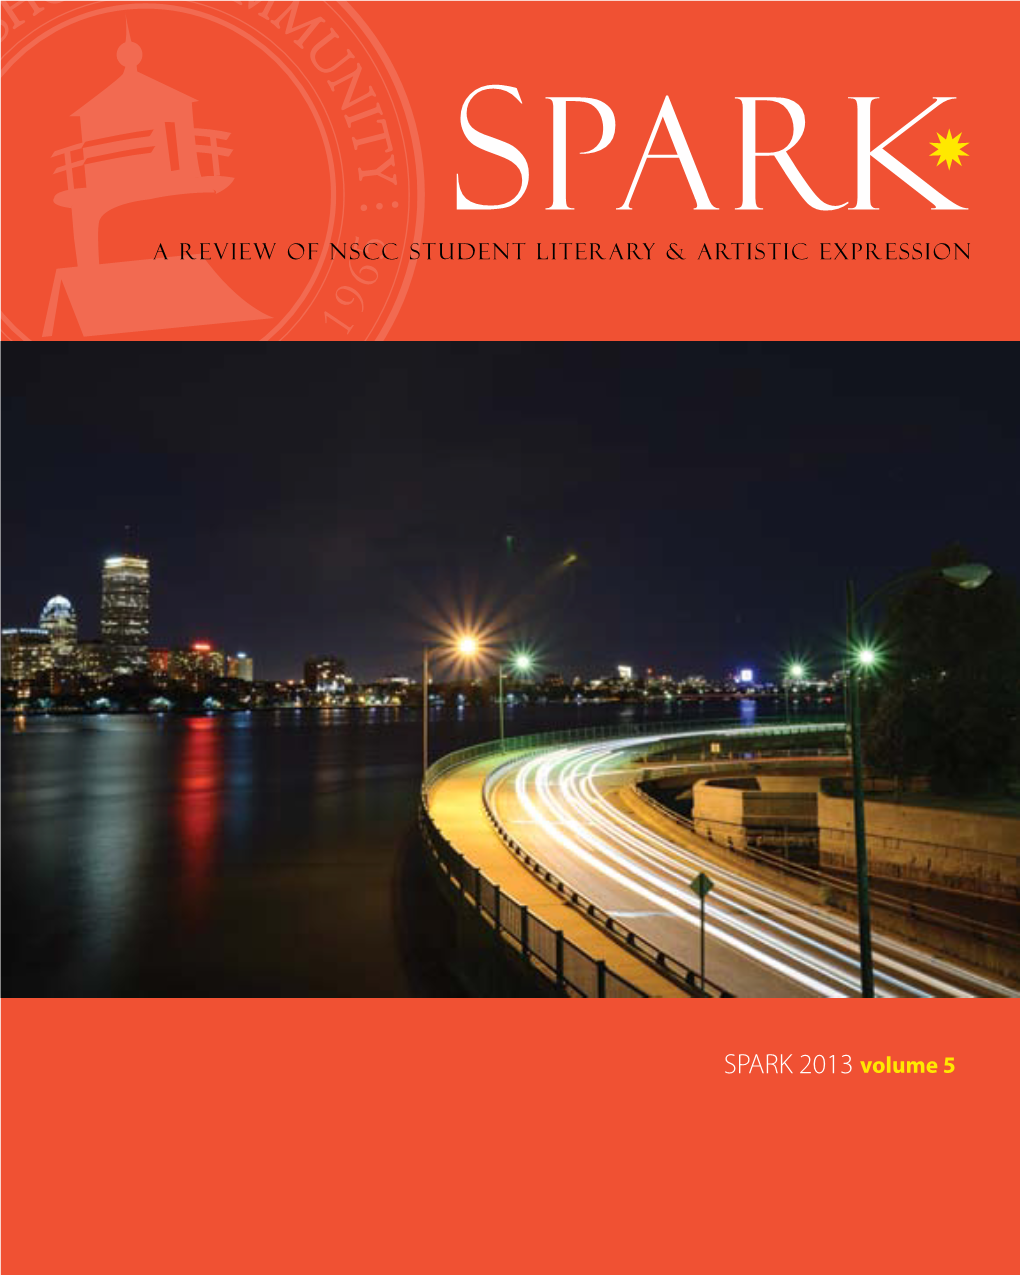 SPARK 2013 Volume 5 Eclectic Spark on the Inside Sparked by Inspiration Original 2